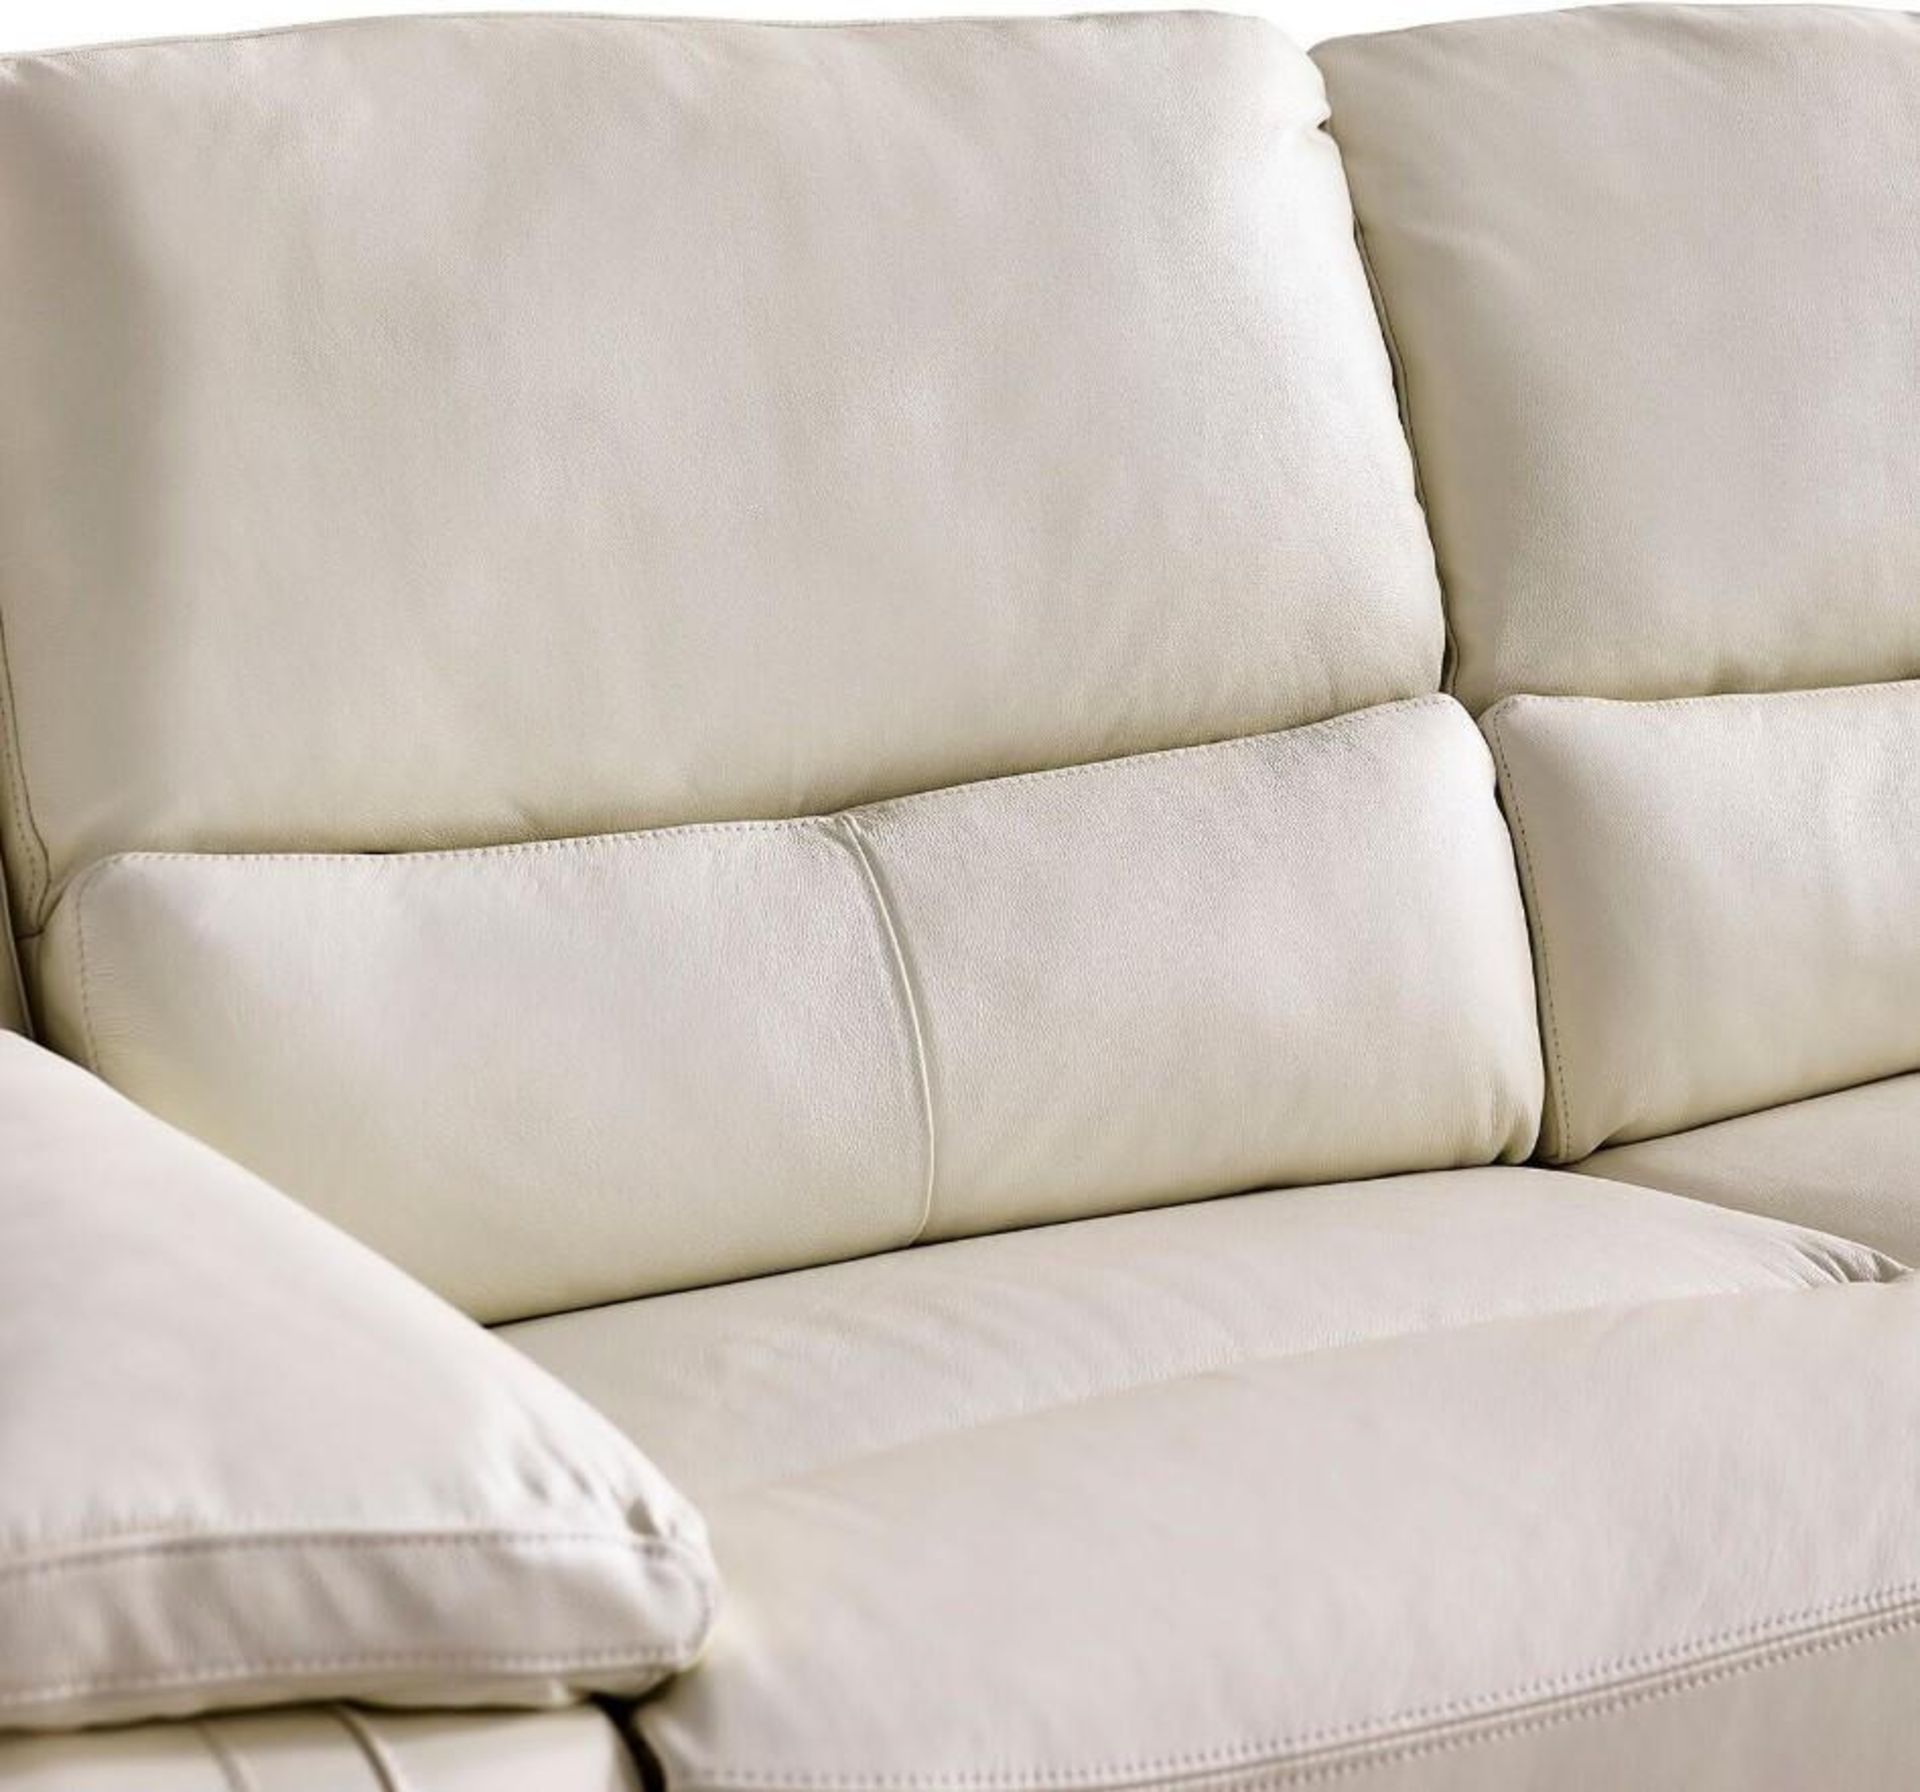 Brand new and boxed SCS Fallon 2 seater static sofa in Cream. - Image 2 of 2